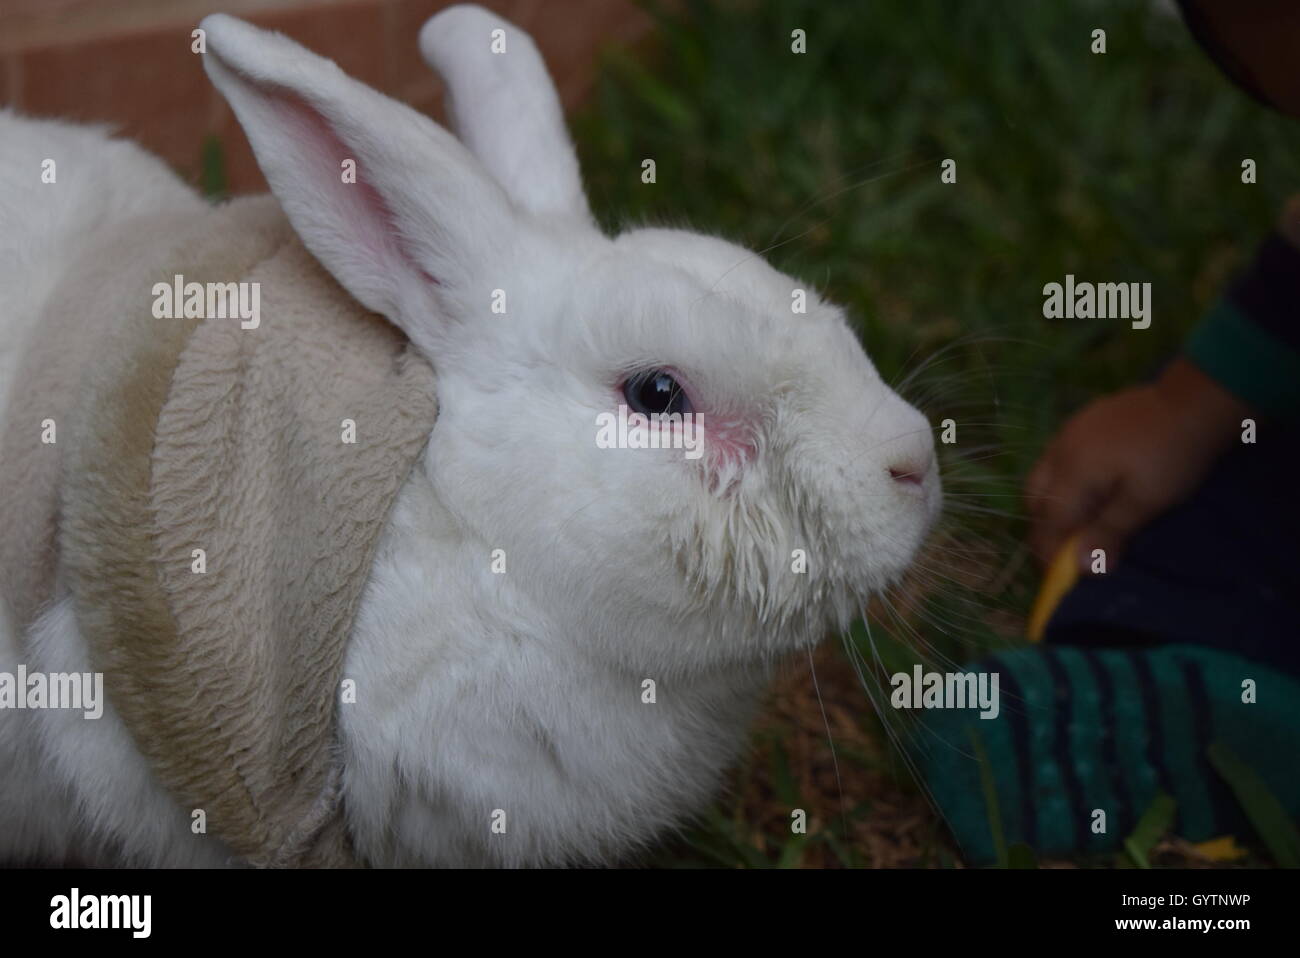 Close-up of a domestic white rabbit with a baby in a garden, Guatemala Stock Photo